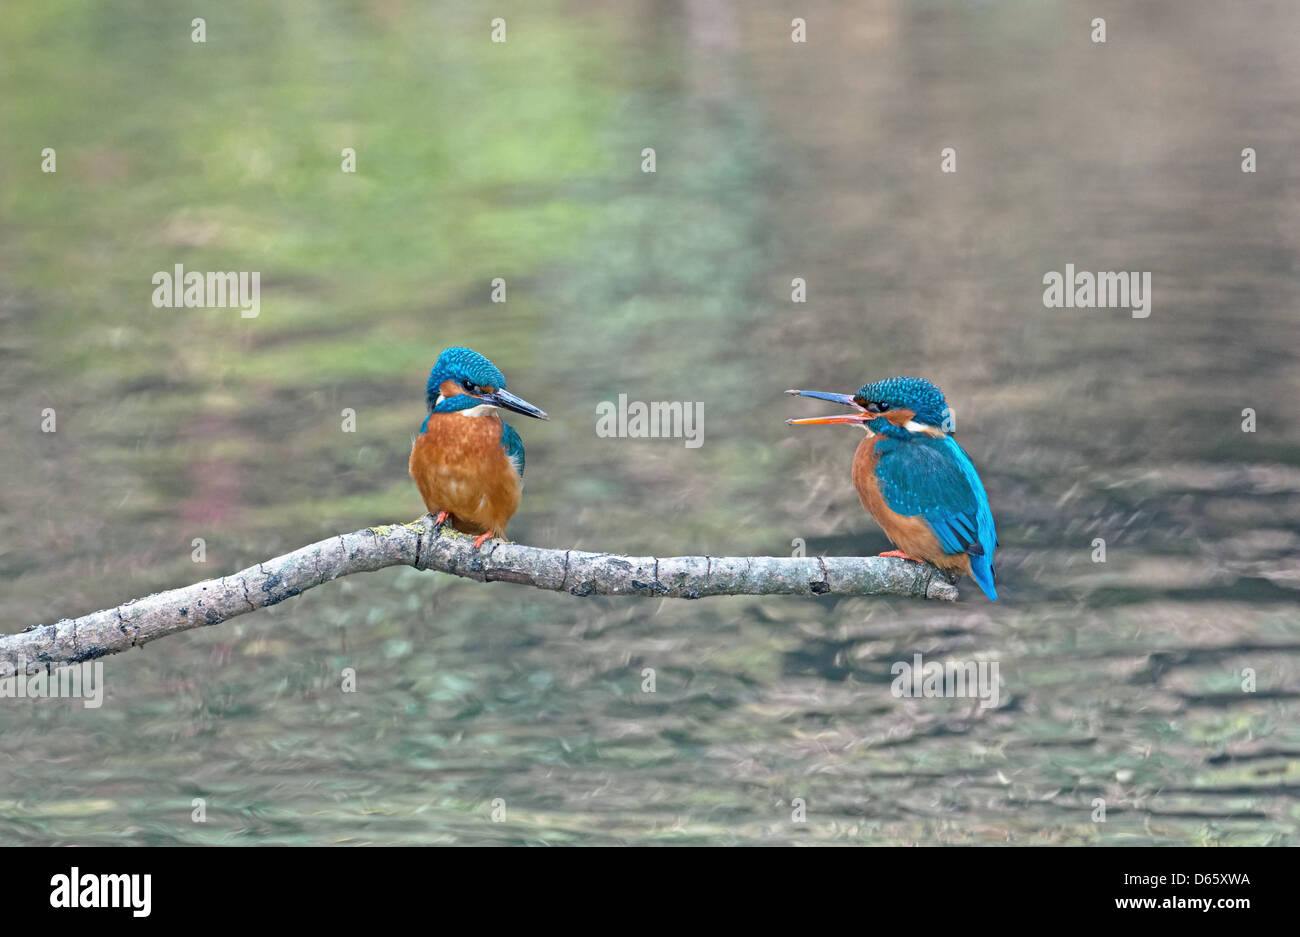 Male And Female Kingfishers, Alcedo atthis, Perched On Branch During Courtship.Spring. UK Stock Photo